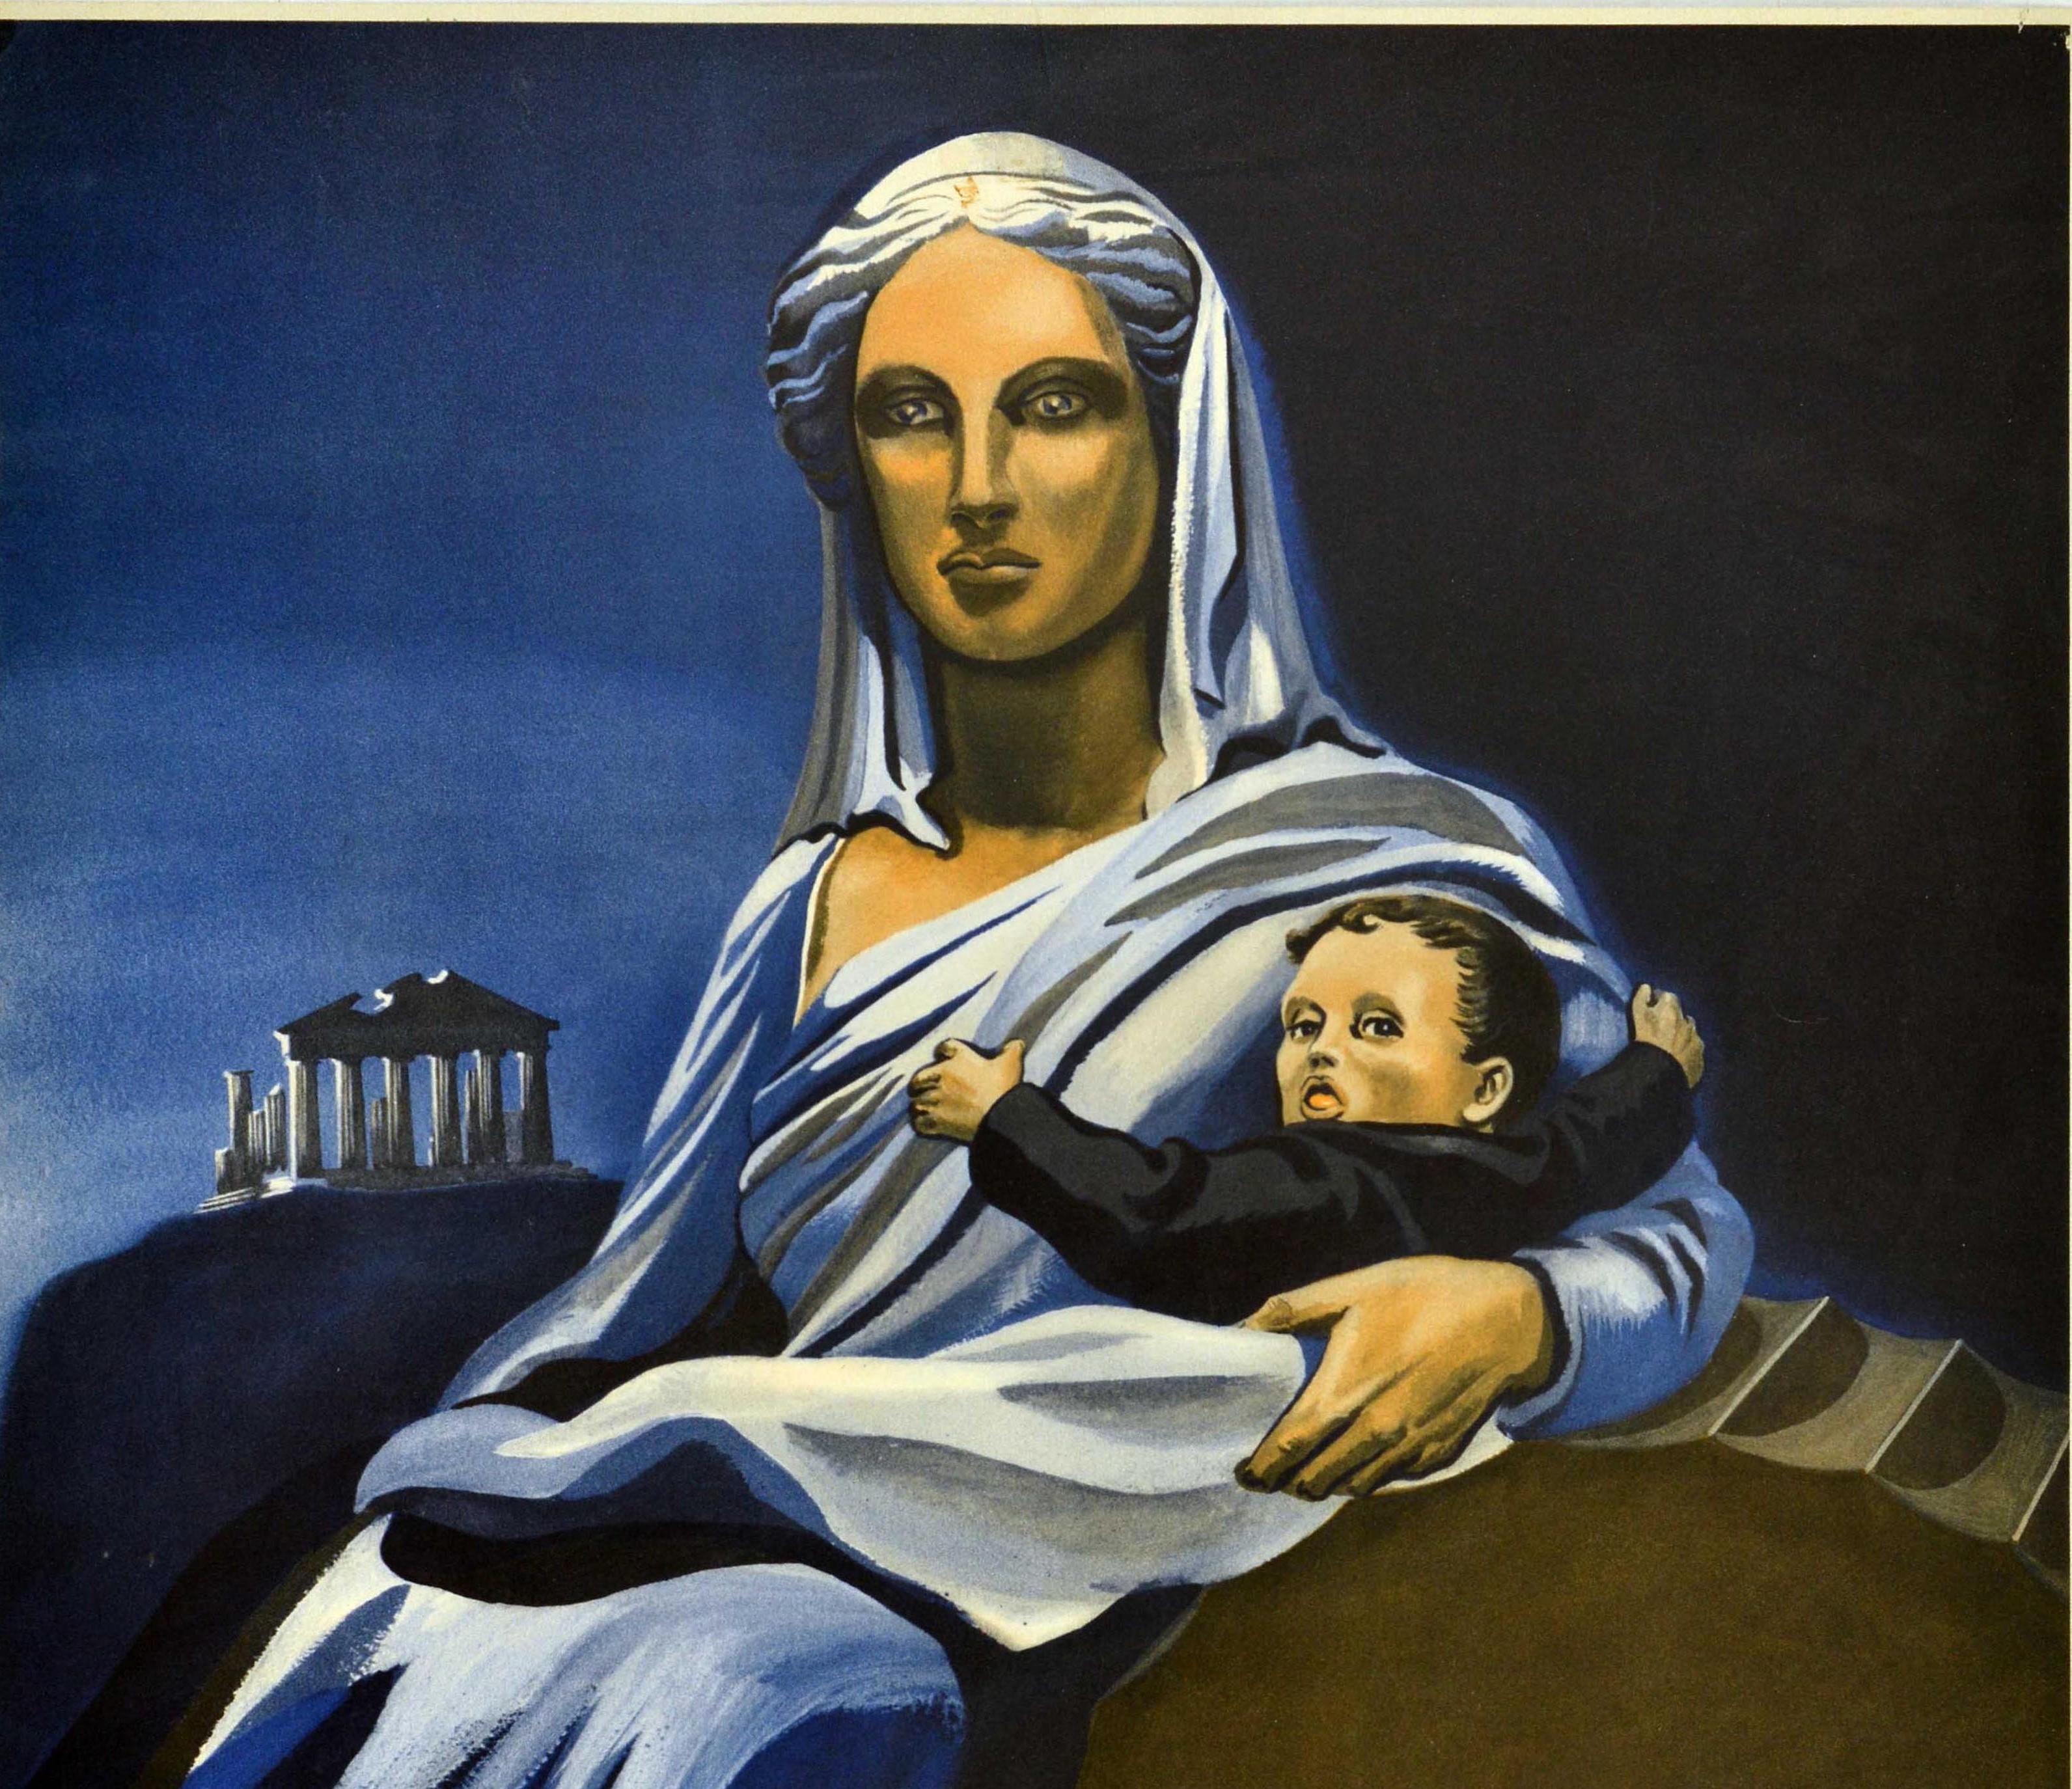 Original vintage World War Two fundraising propaganda poster - Lest it be too Late! Help Greece Now - issued by the Greek War Relief Association Inc 730 Fifth Avenue New York featuring striking artwork in a classical design depicting a mother